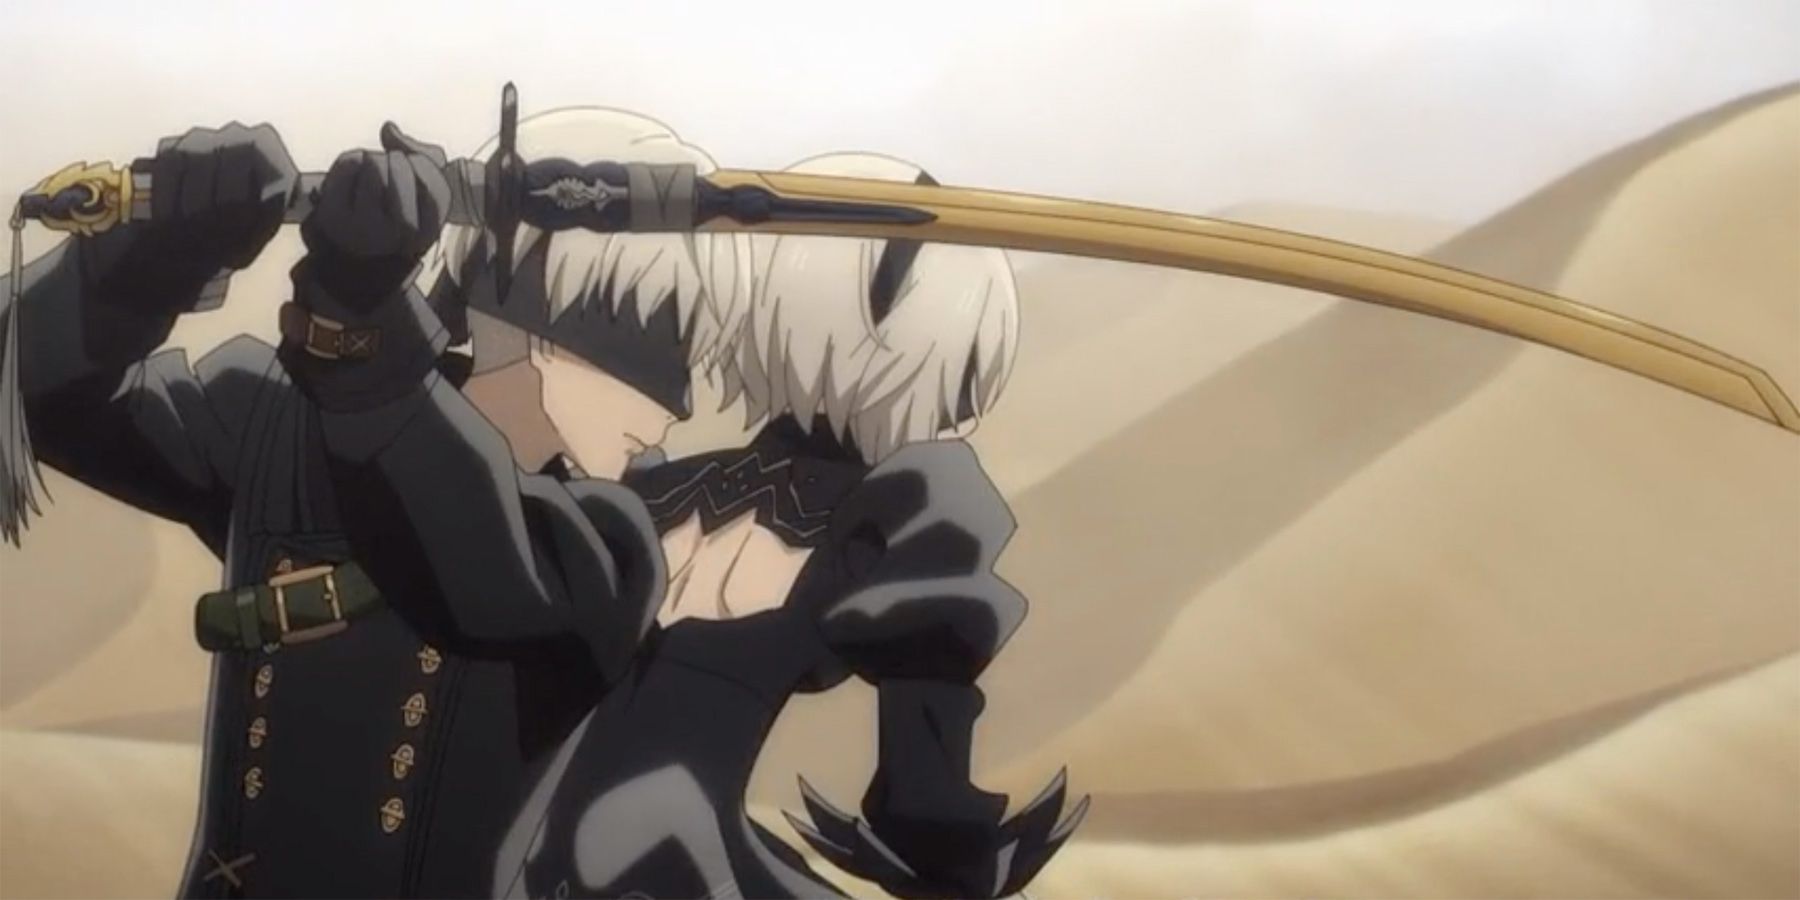 NieR: Automata Ver1.1a episode 3 release date, where to watch